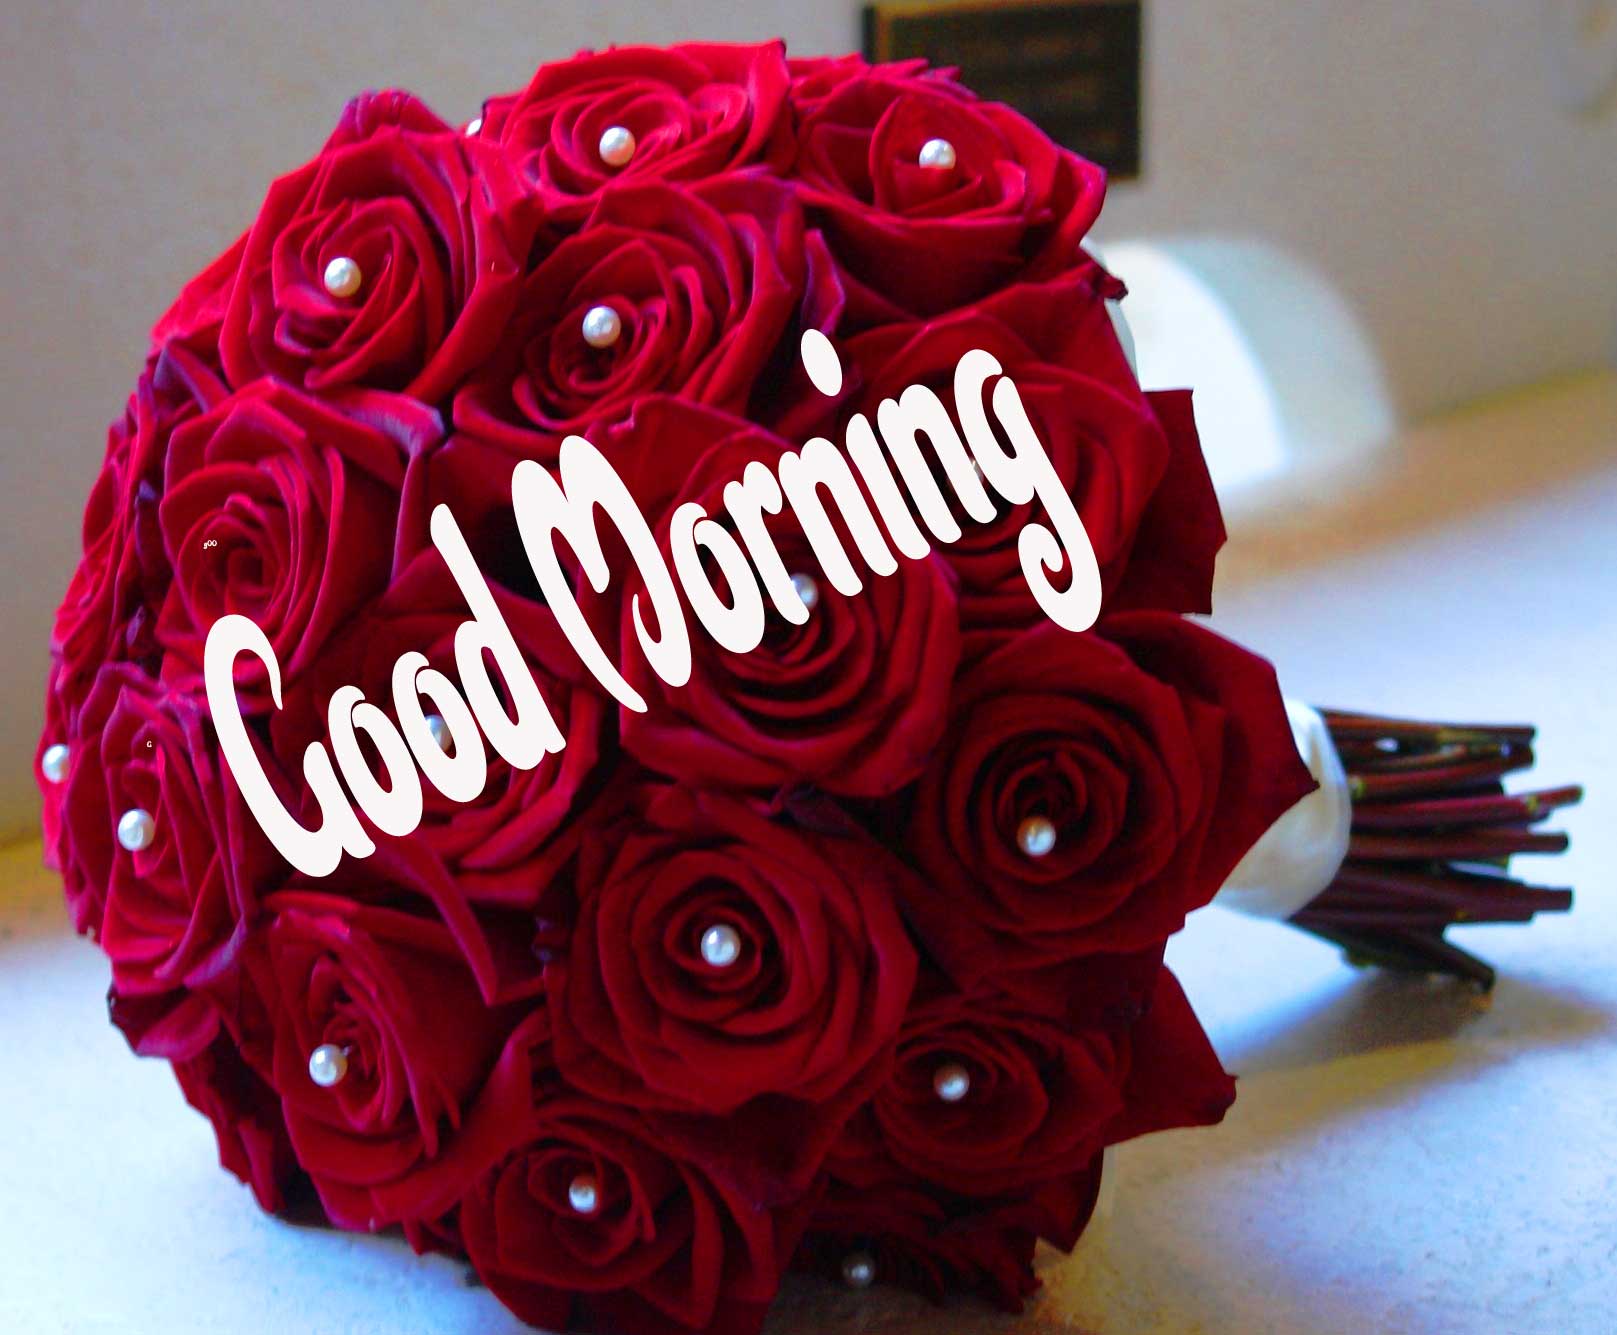 Best Latest Good Morning Images Pics Free Download 